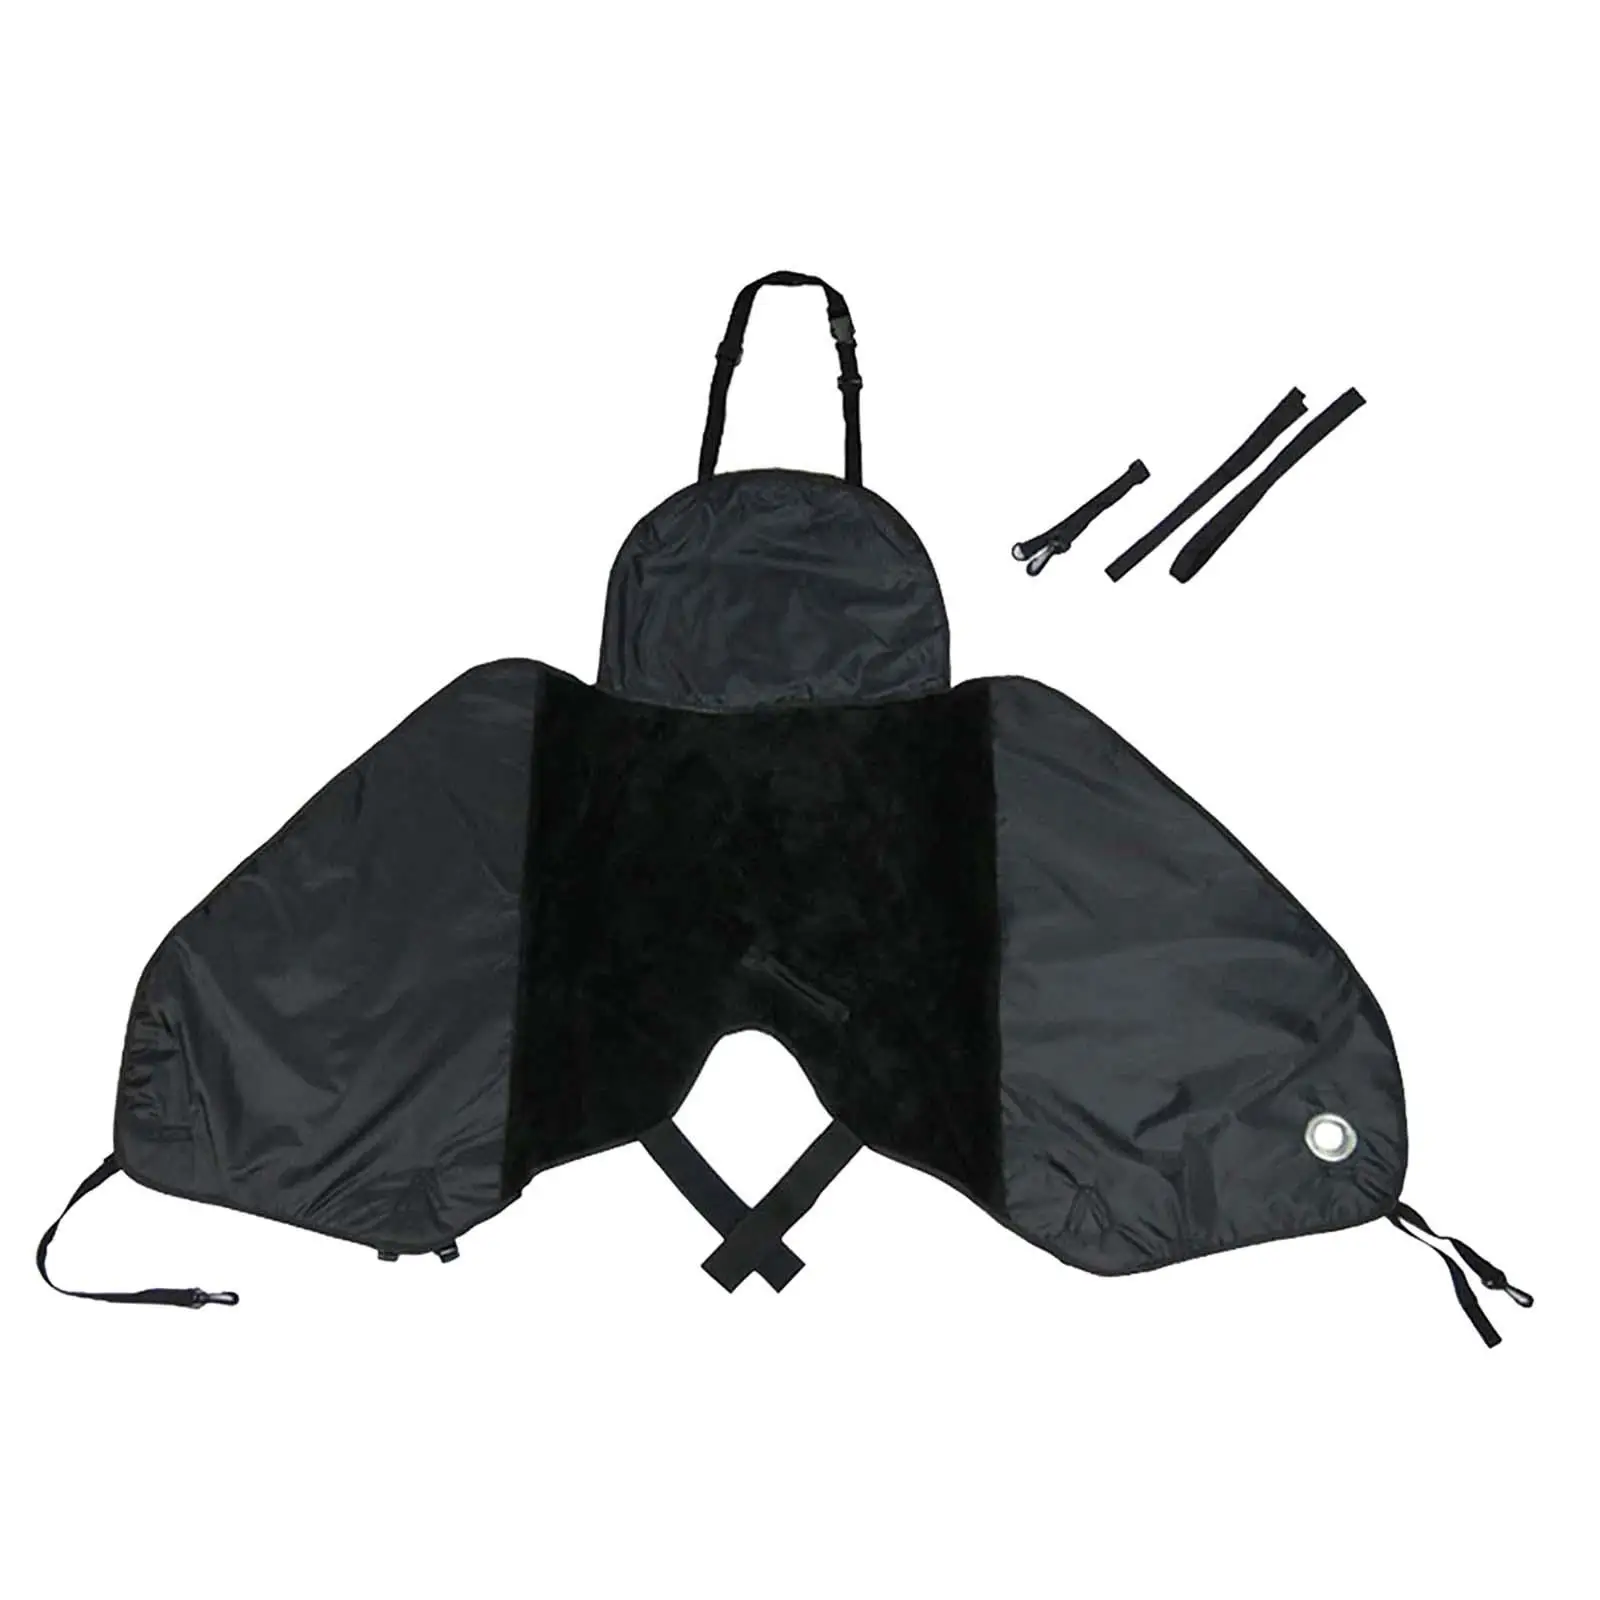 Motorcycle Windproof Quilt Multifunction Tarpaulin Lap Cover Reusable Accessories Warm Riding Apron Universal Windshield